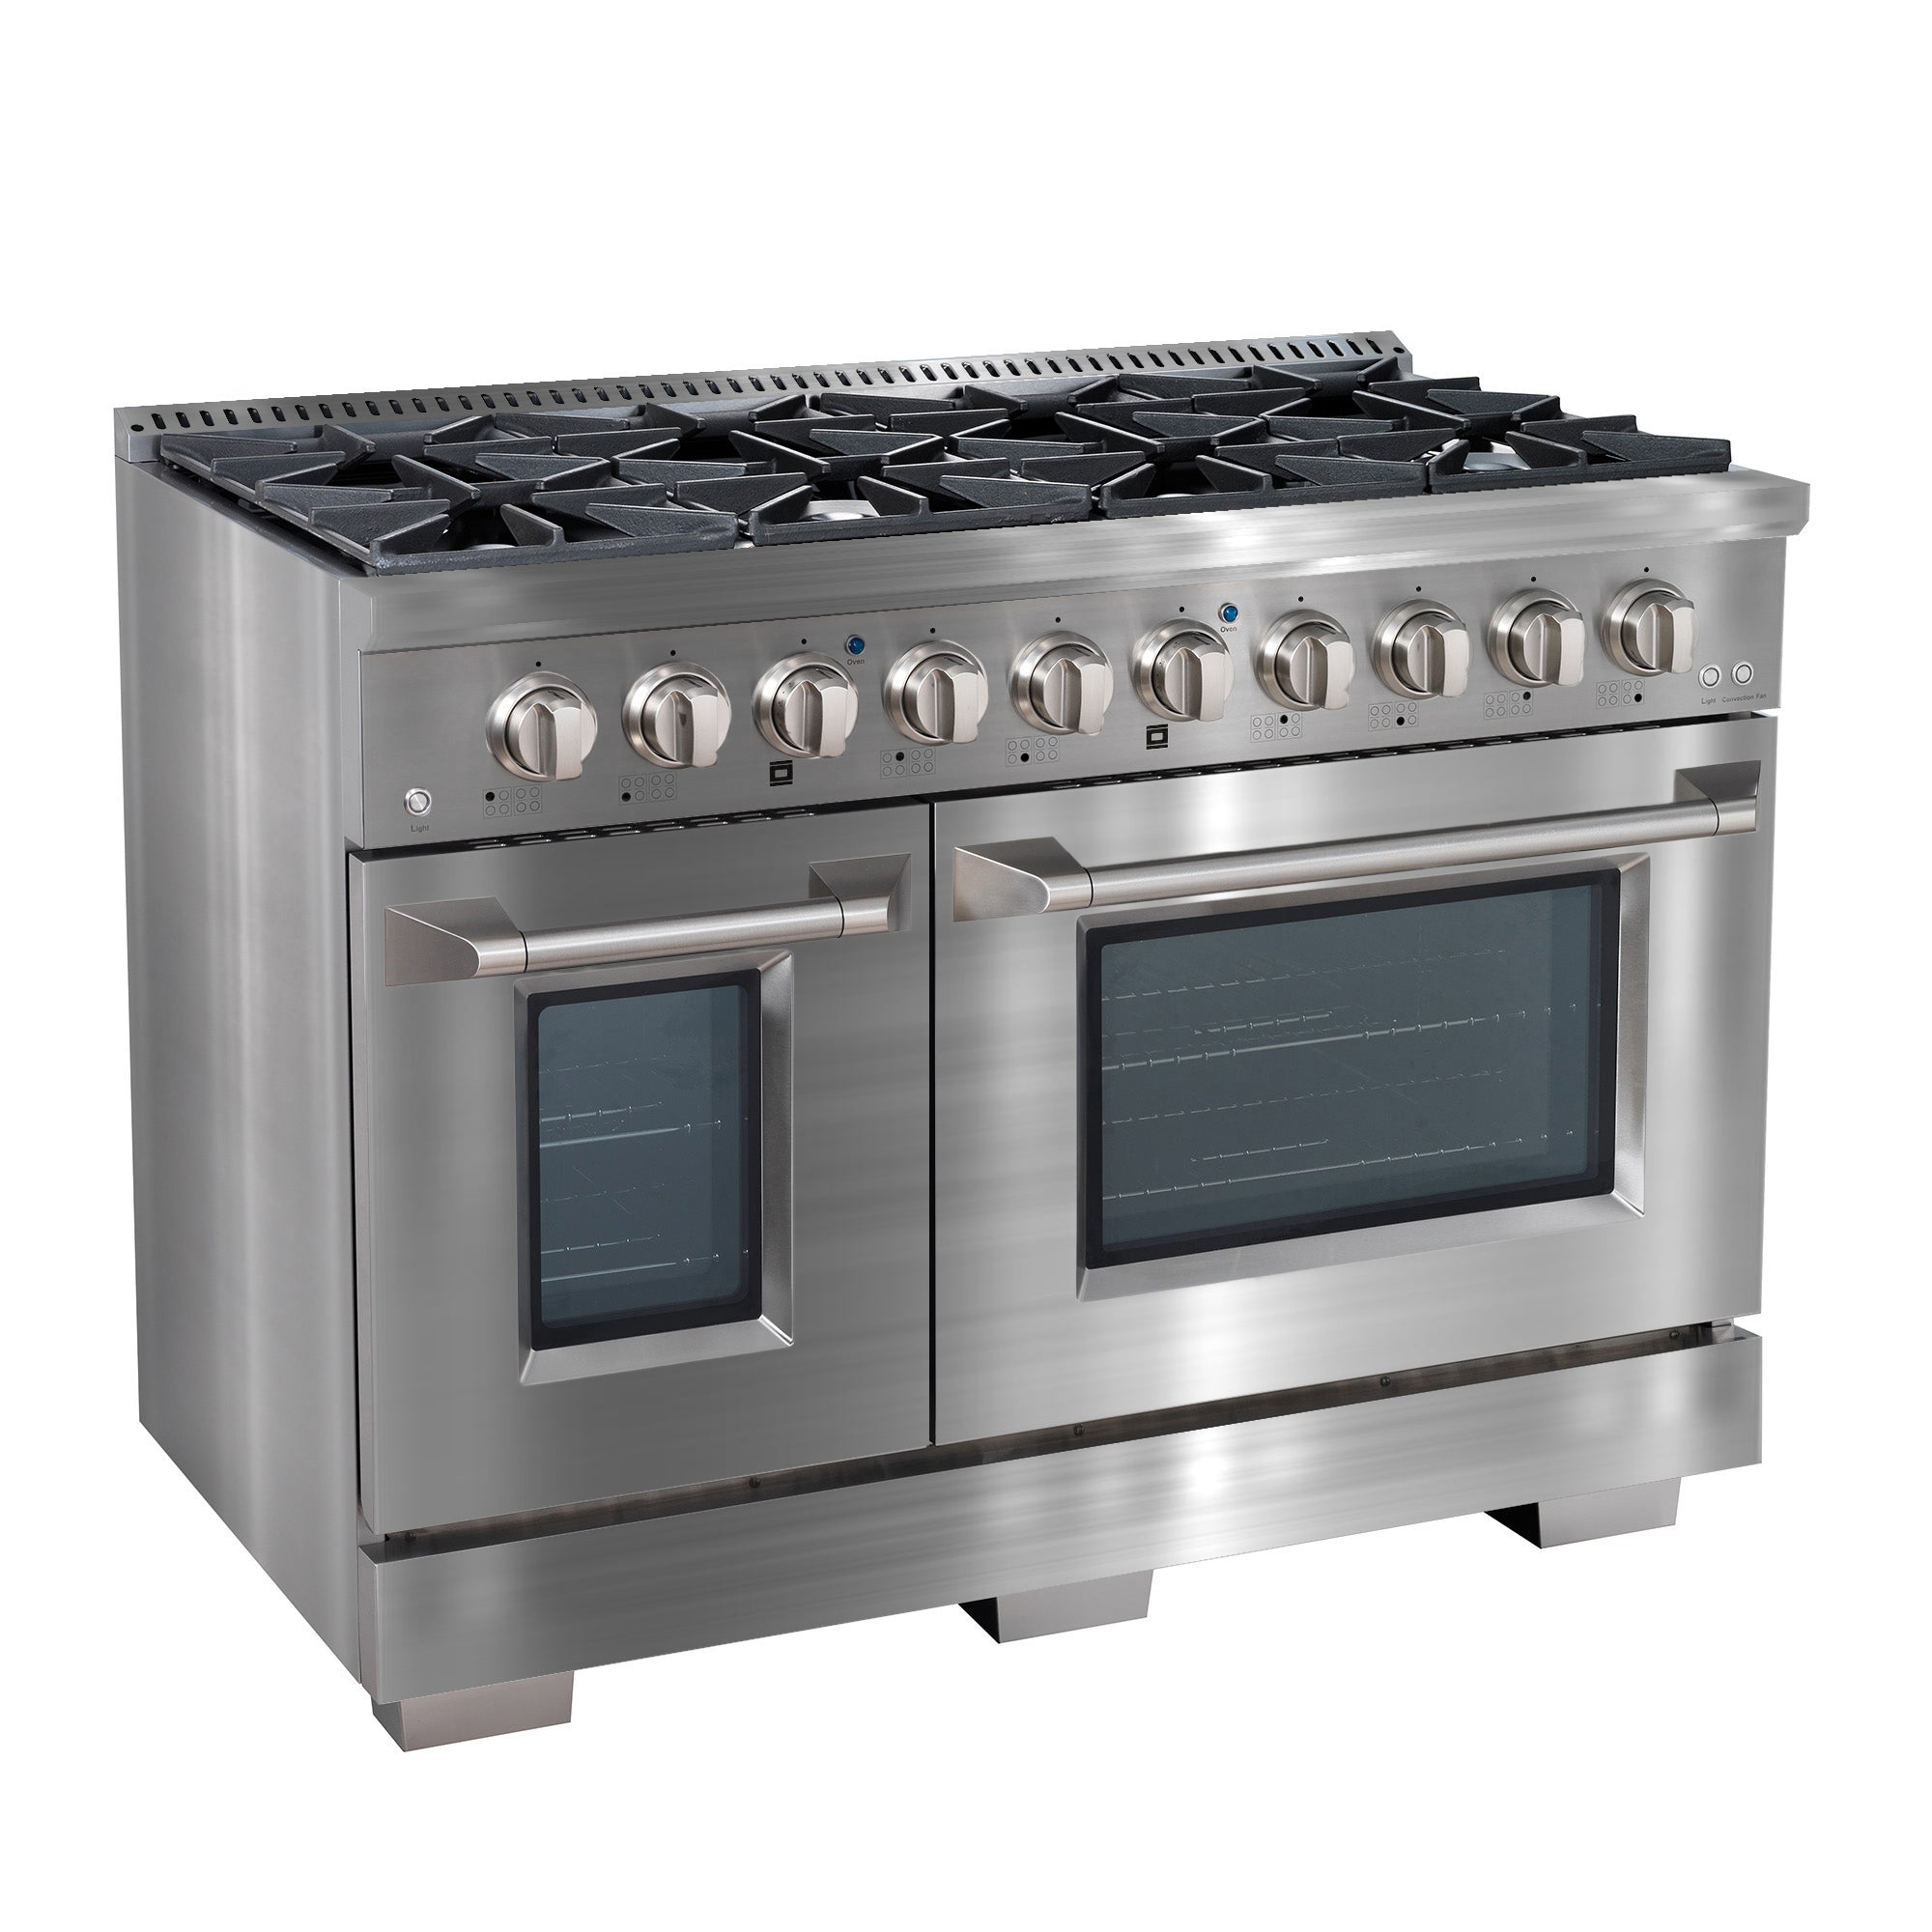 Ancona 48” 6.7 cu. Ft Double Oven Dual Fuel Range with 8 Burners with Griddle and Convection Oven in Stainless Steel